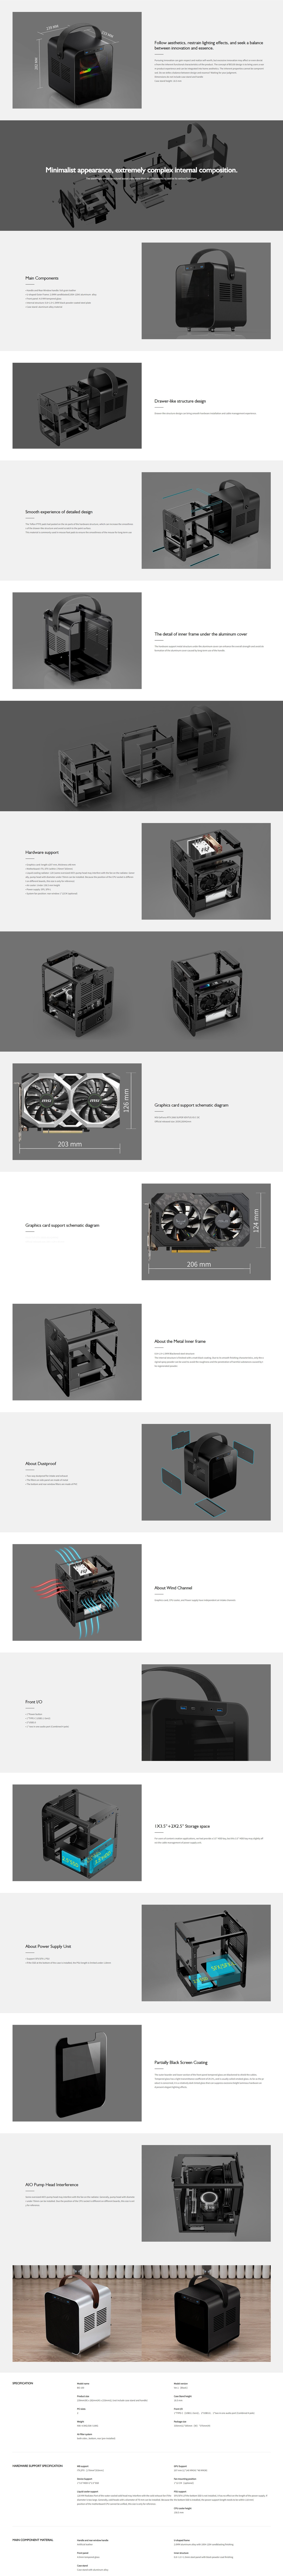 A large marketing image providing additional information about the product Jonsplus Pure BO 100 Black mITX Case w/Tempered Glass Window - Additional alt info not provided